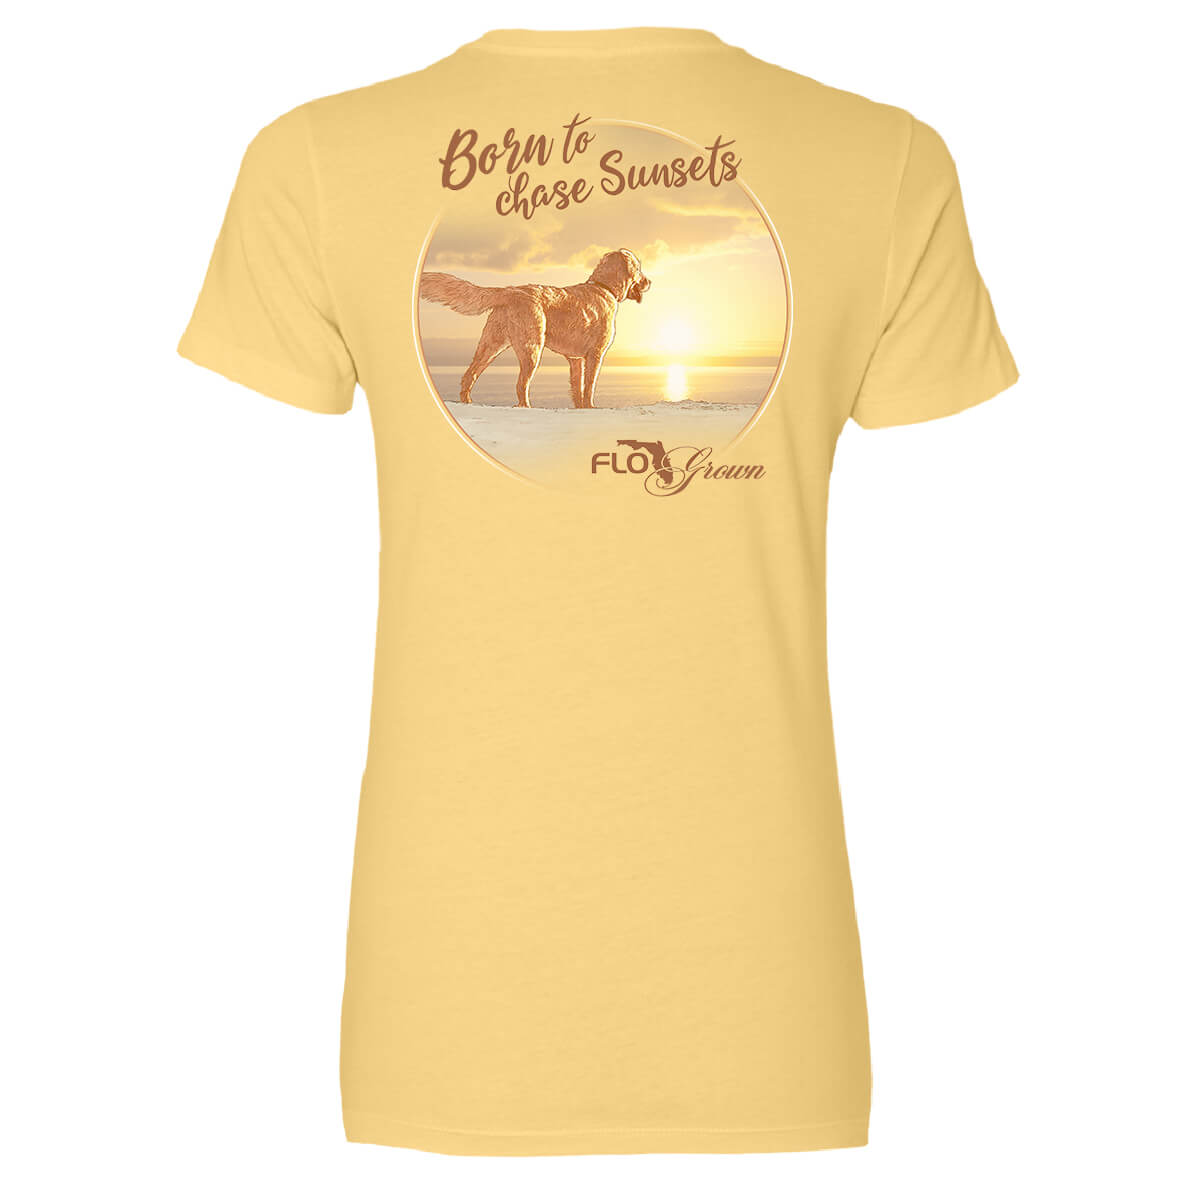 Born to Chase Sunsets Women's Tee